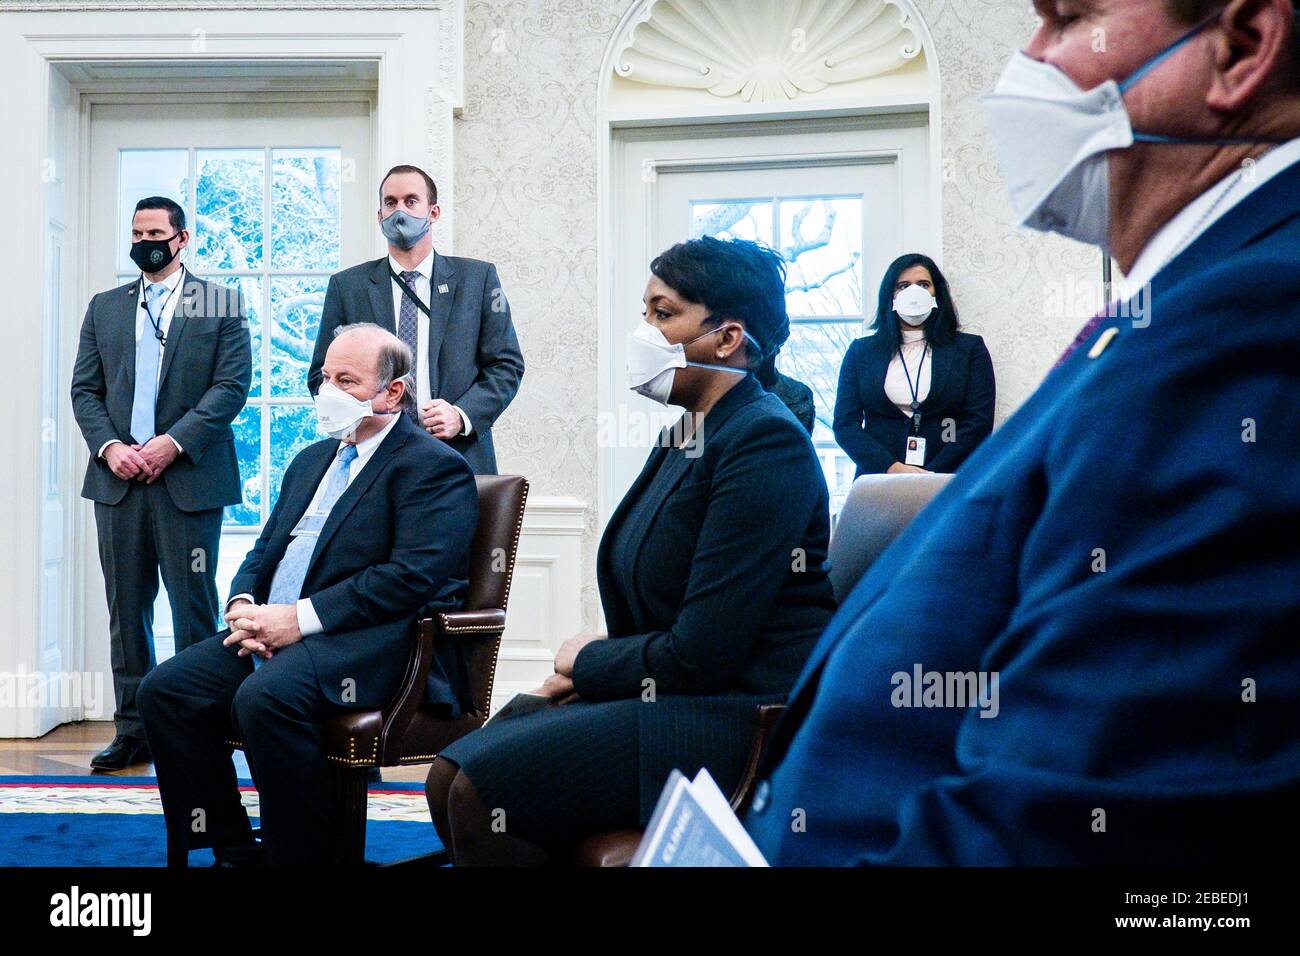 Mayor Mike Duggan (D-Detroit, MI), left, and Mayor Keisha Lance Bottoms (D-Atlanta GA), center look on as President Joe Biden and Vice President Kamala Harris meet with governors and mayors in the Oval Office in Washington, DC, on Friday, Feb. 12, 2021, to discuss the vital need to pass the American Rescue Plan, which will get more support to their communities and those on the front lines of the fight against COVID-19. Attending where: Governor Andrew Cuomo (D-NY) Governor Asa Hutchinson (R-AR) Governor Michelle Lujan Grisham (D-NM) Governor Larry Hogan (R-MD) Mayor Keisha Lance Bottoms (D Stock Photo